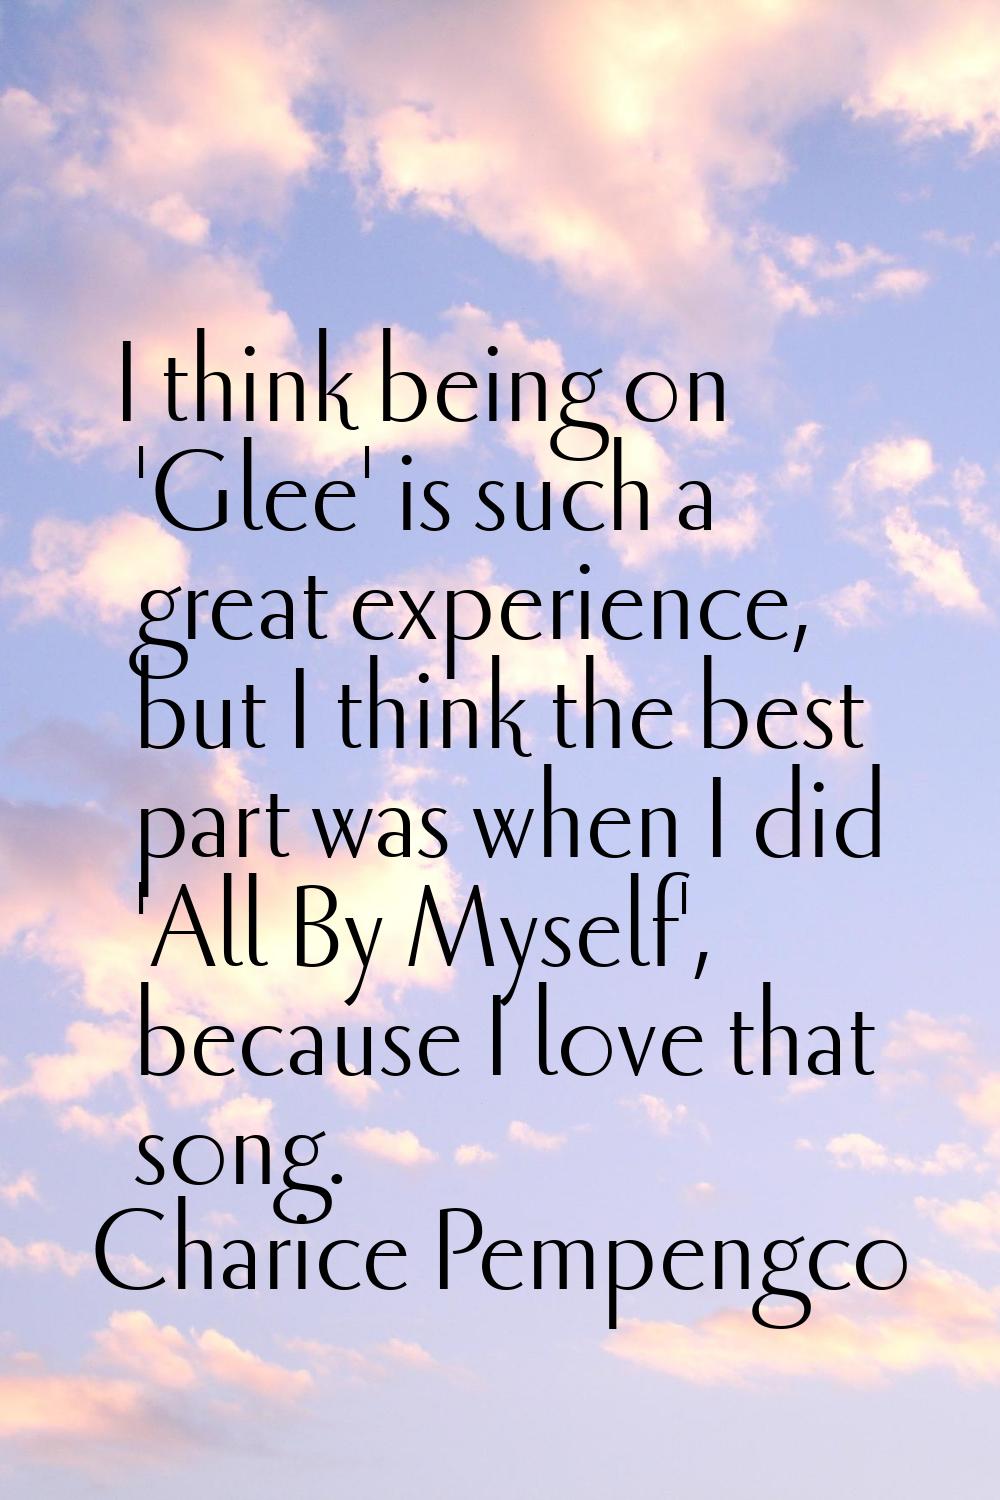 I think being on 'Glee' is such a great experience, but I think the best part was when I did 'All B